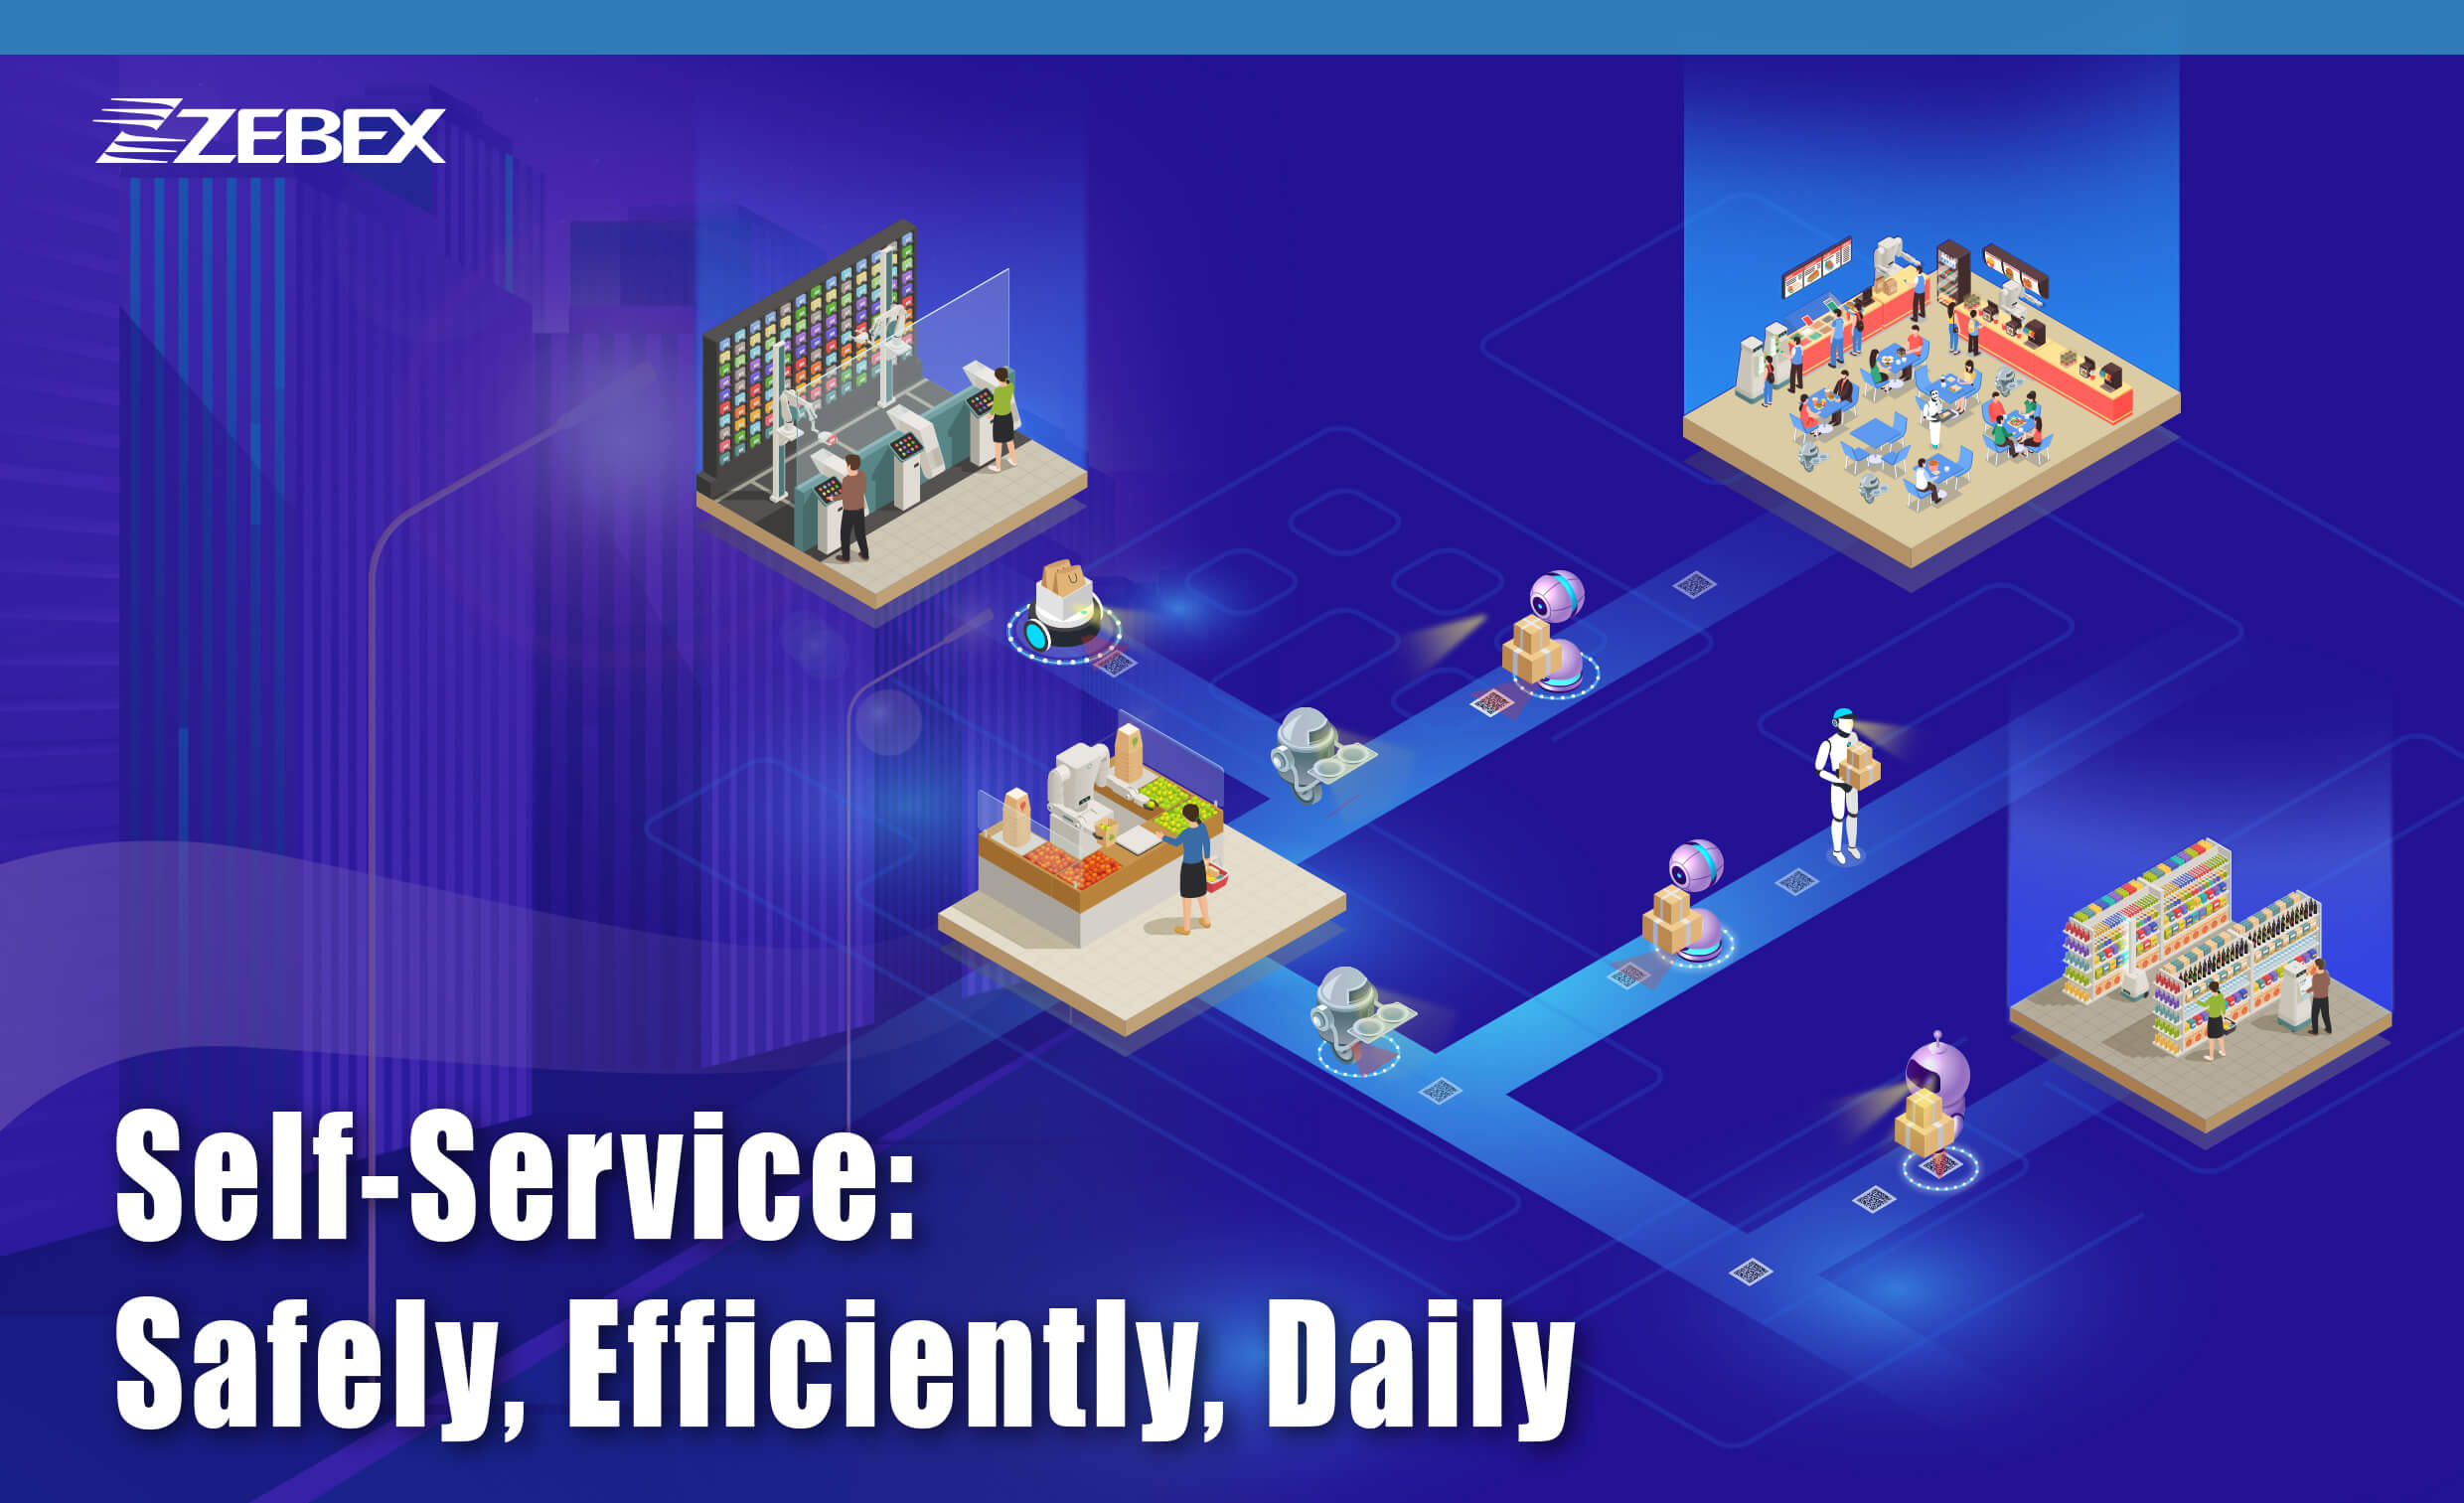 ZEBEX,Self-Service_Safely_Efficiently_Daily